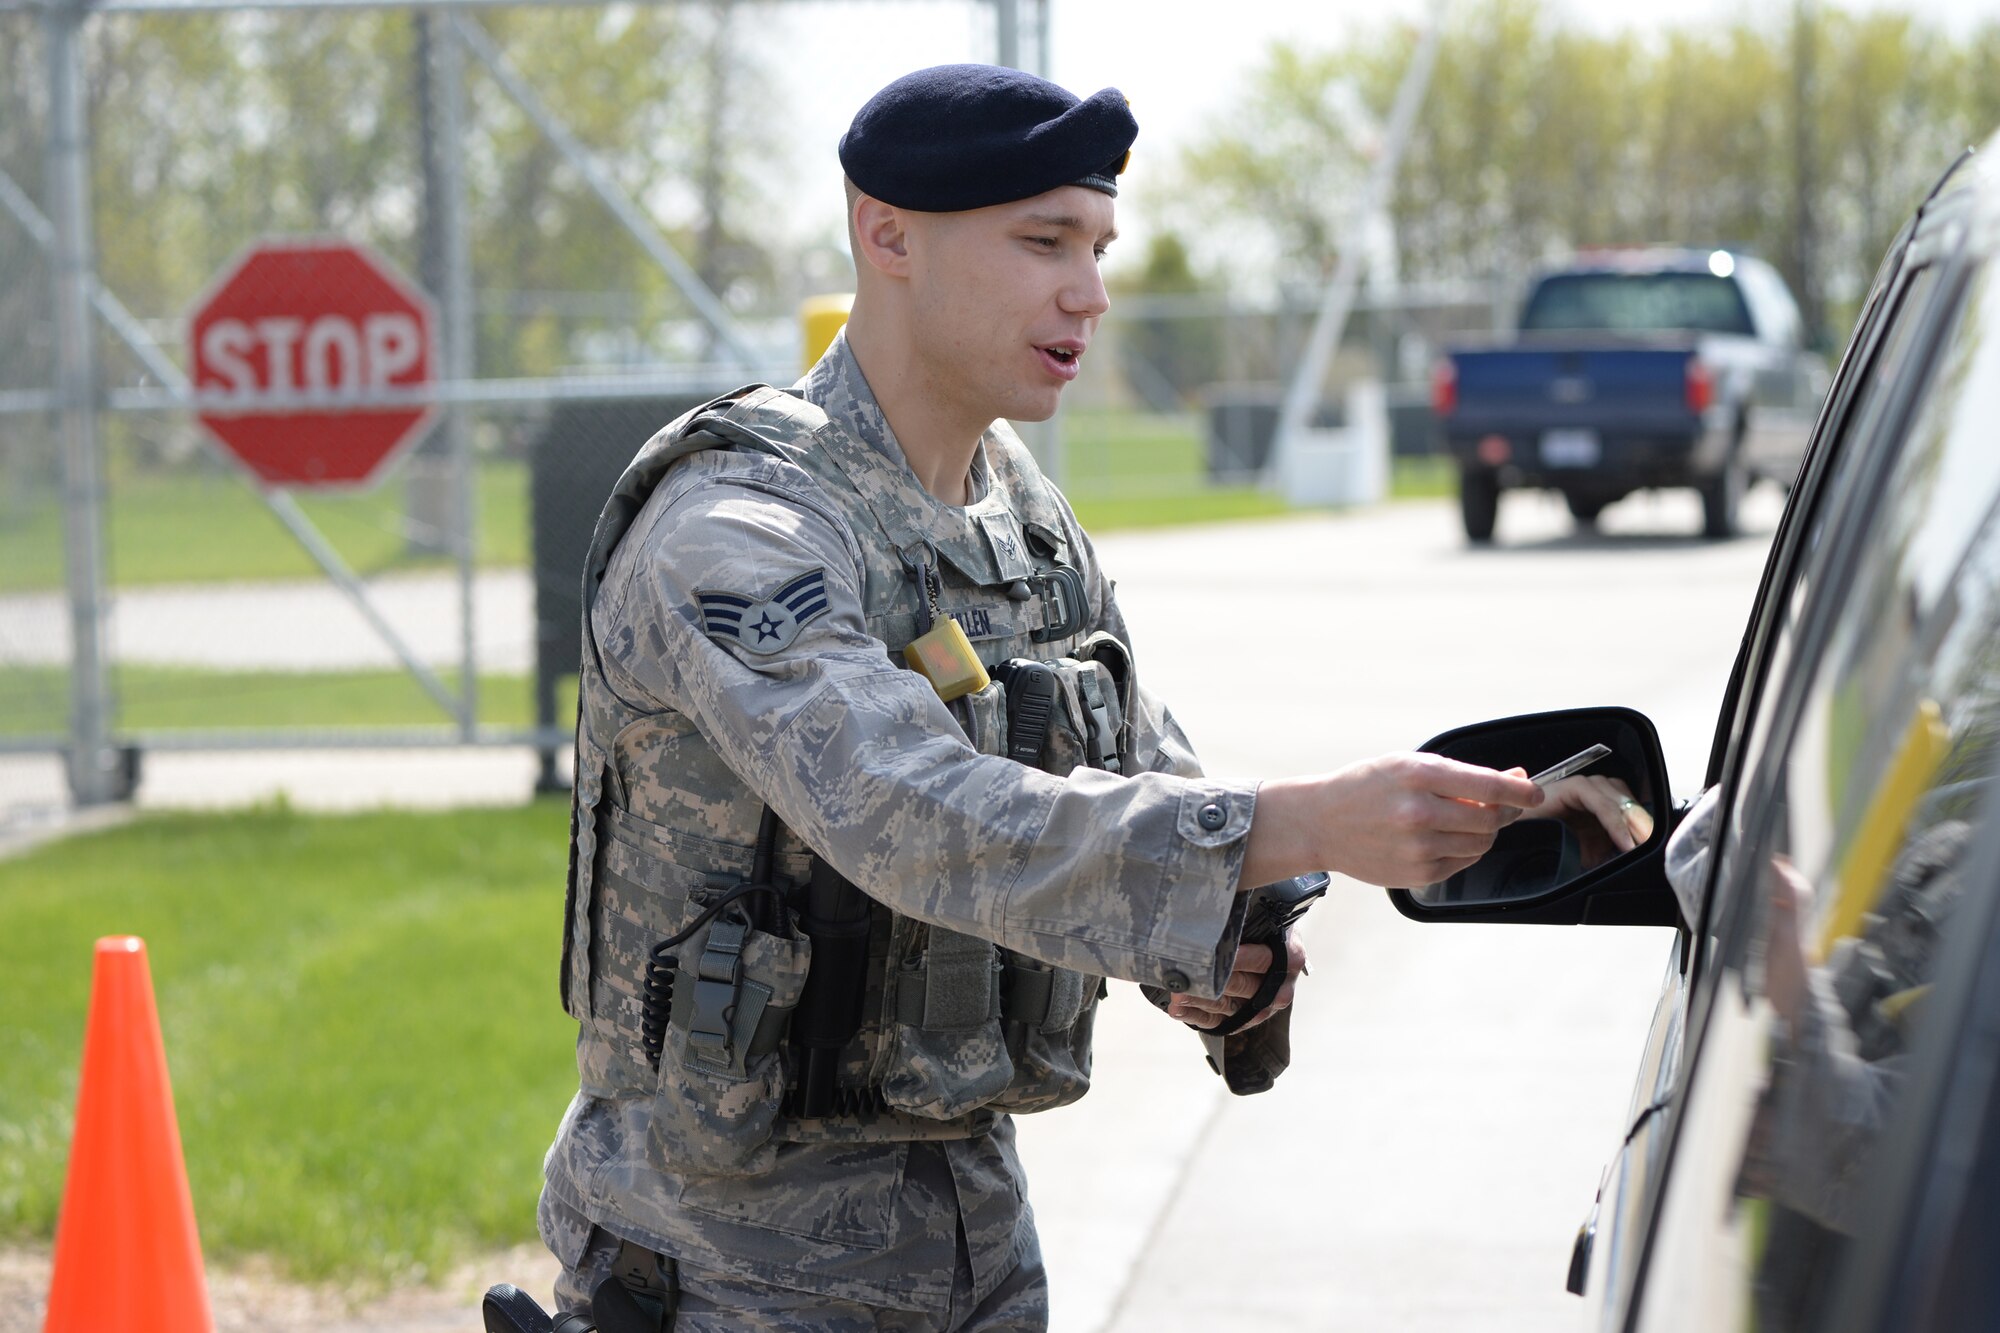 Senior Airman Michael Bullen, of the 119th Security Forces Squadron, checks the identification of personnel entering the North Dakota Air National Guard Base, Fargo, North Dakota, May 12, 2015. (U.S. Air National Guard photo by Senior Master Sgt. David H. Lipp/Released)